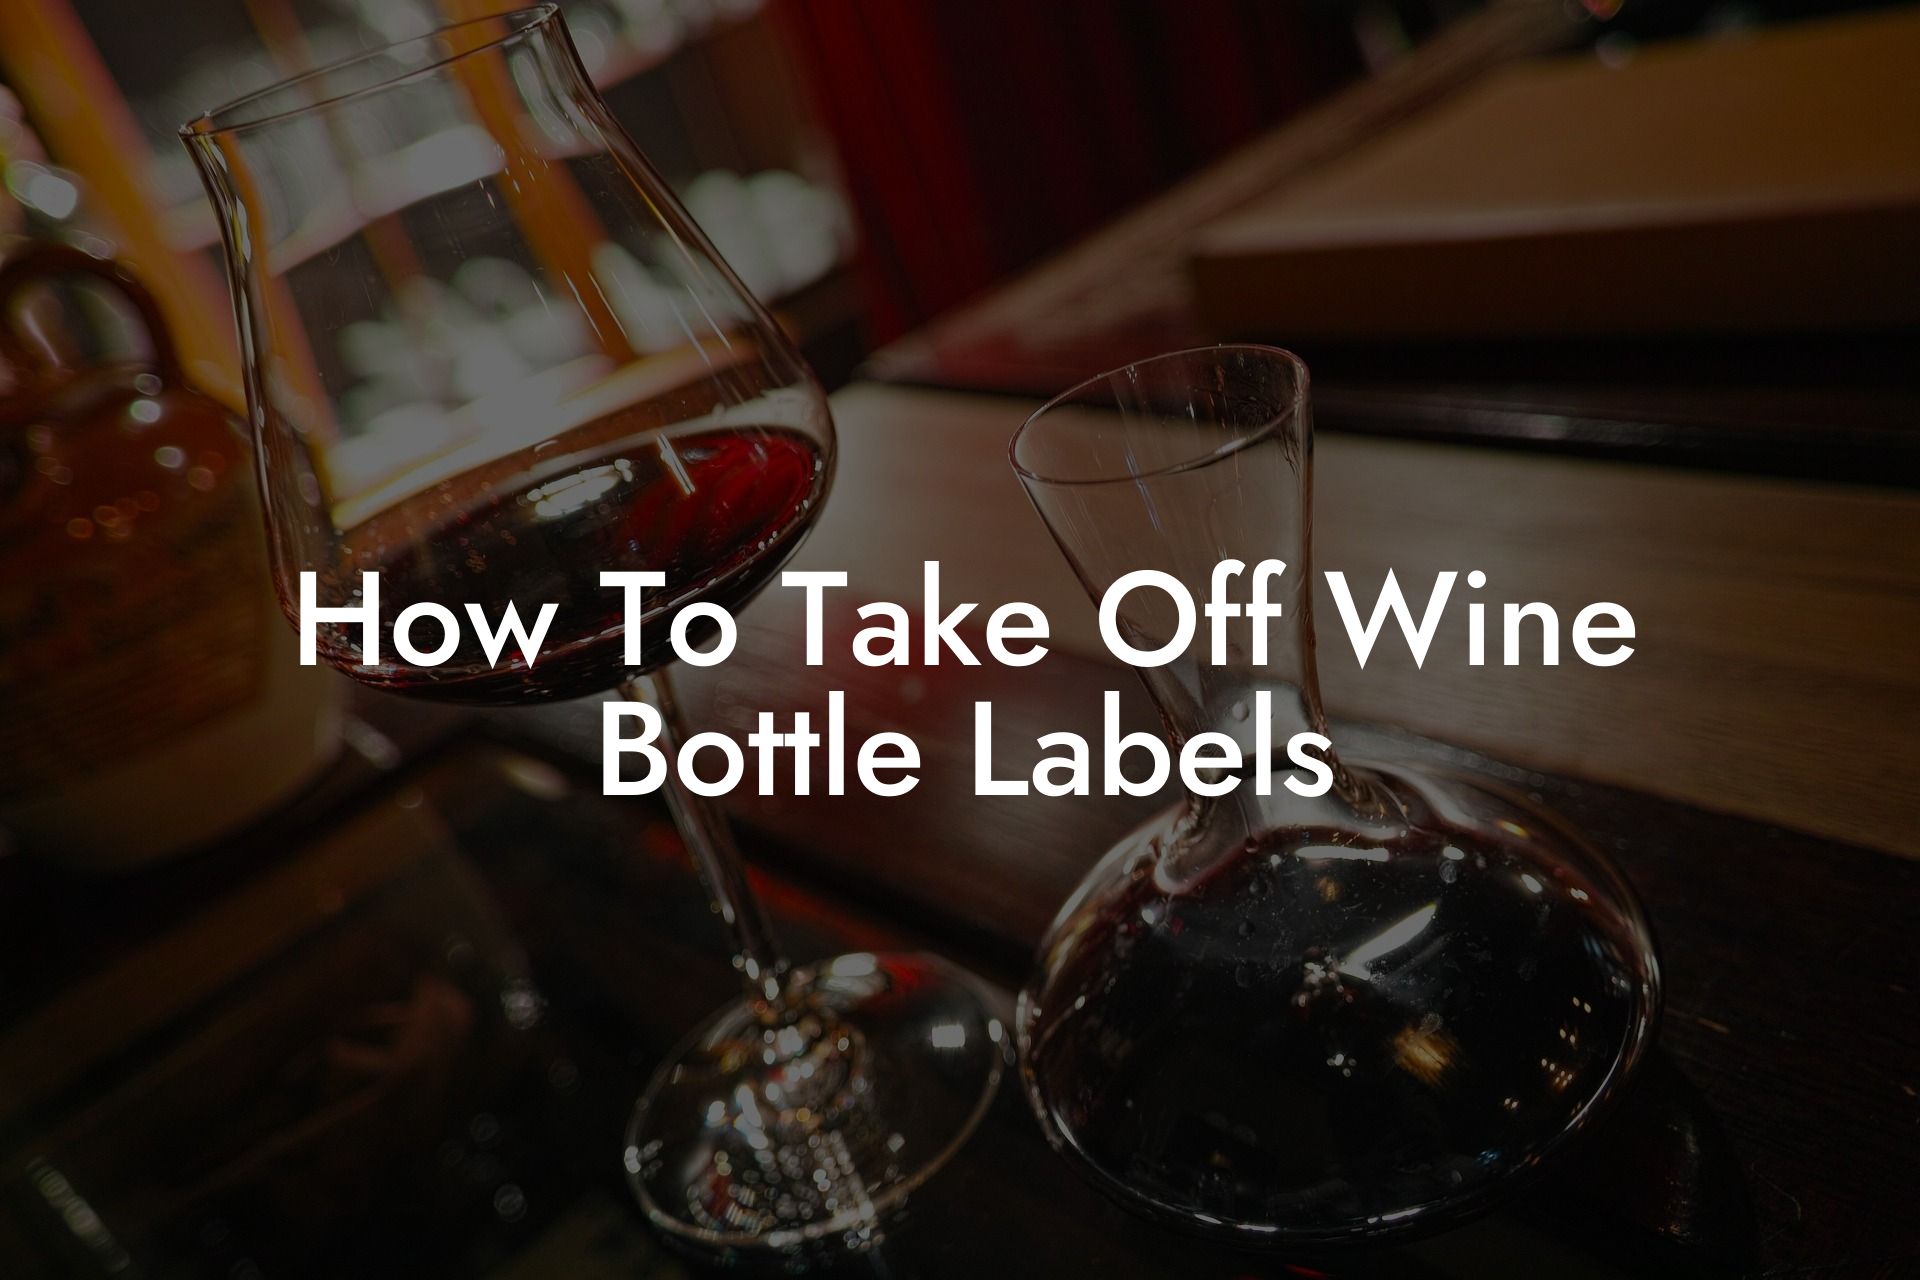 How To Take Off Wine Bottle Labels